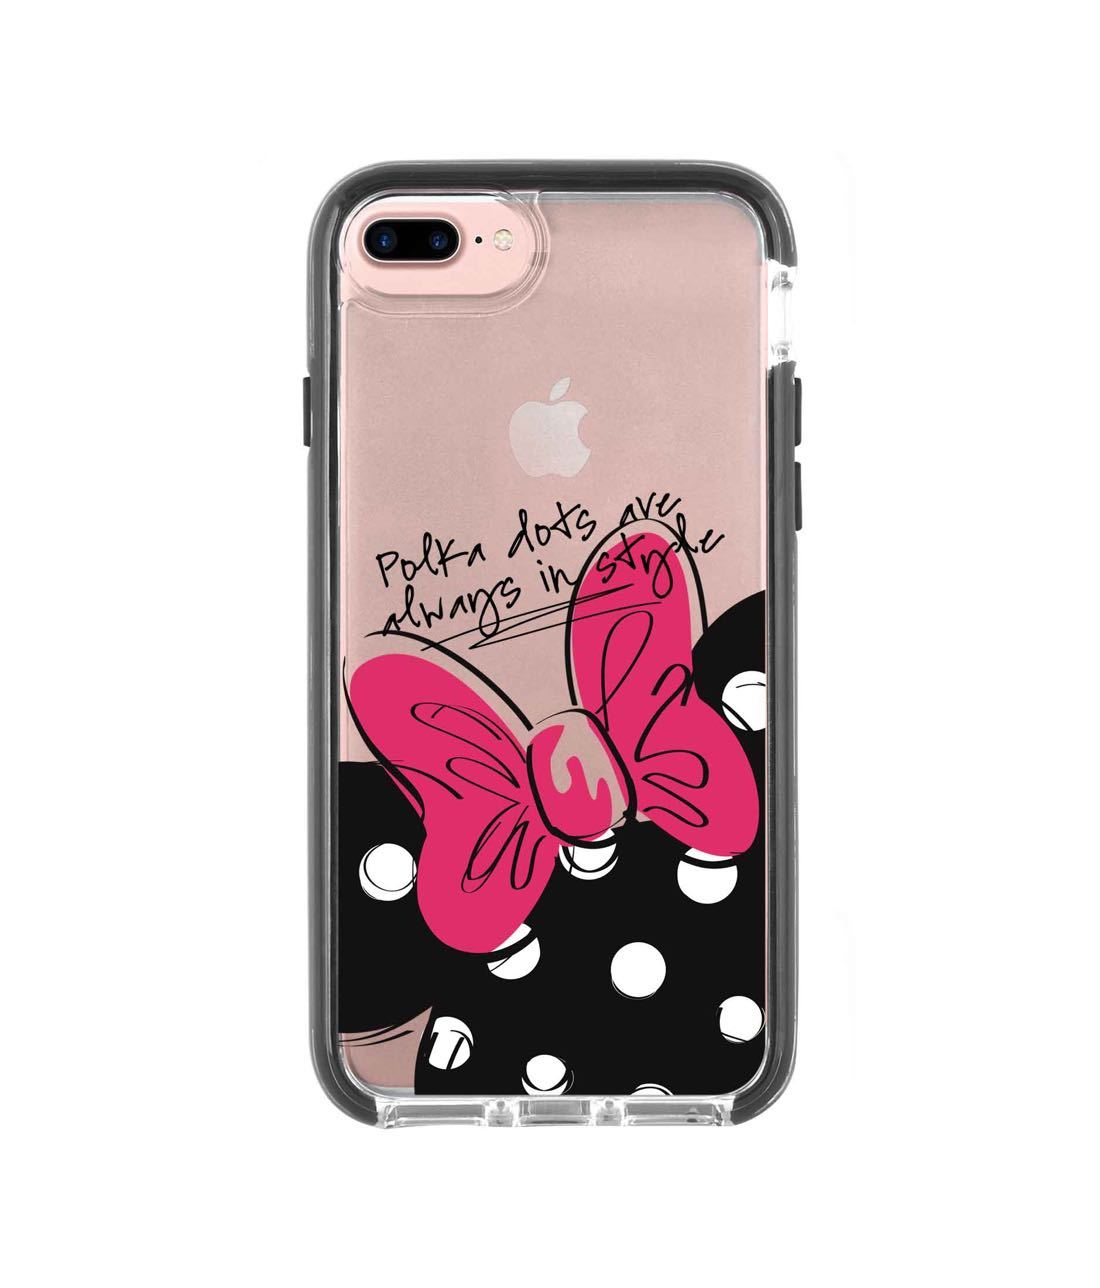 Polka Minnie - Extreme Phone Case for iPhone 7 Plus